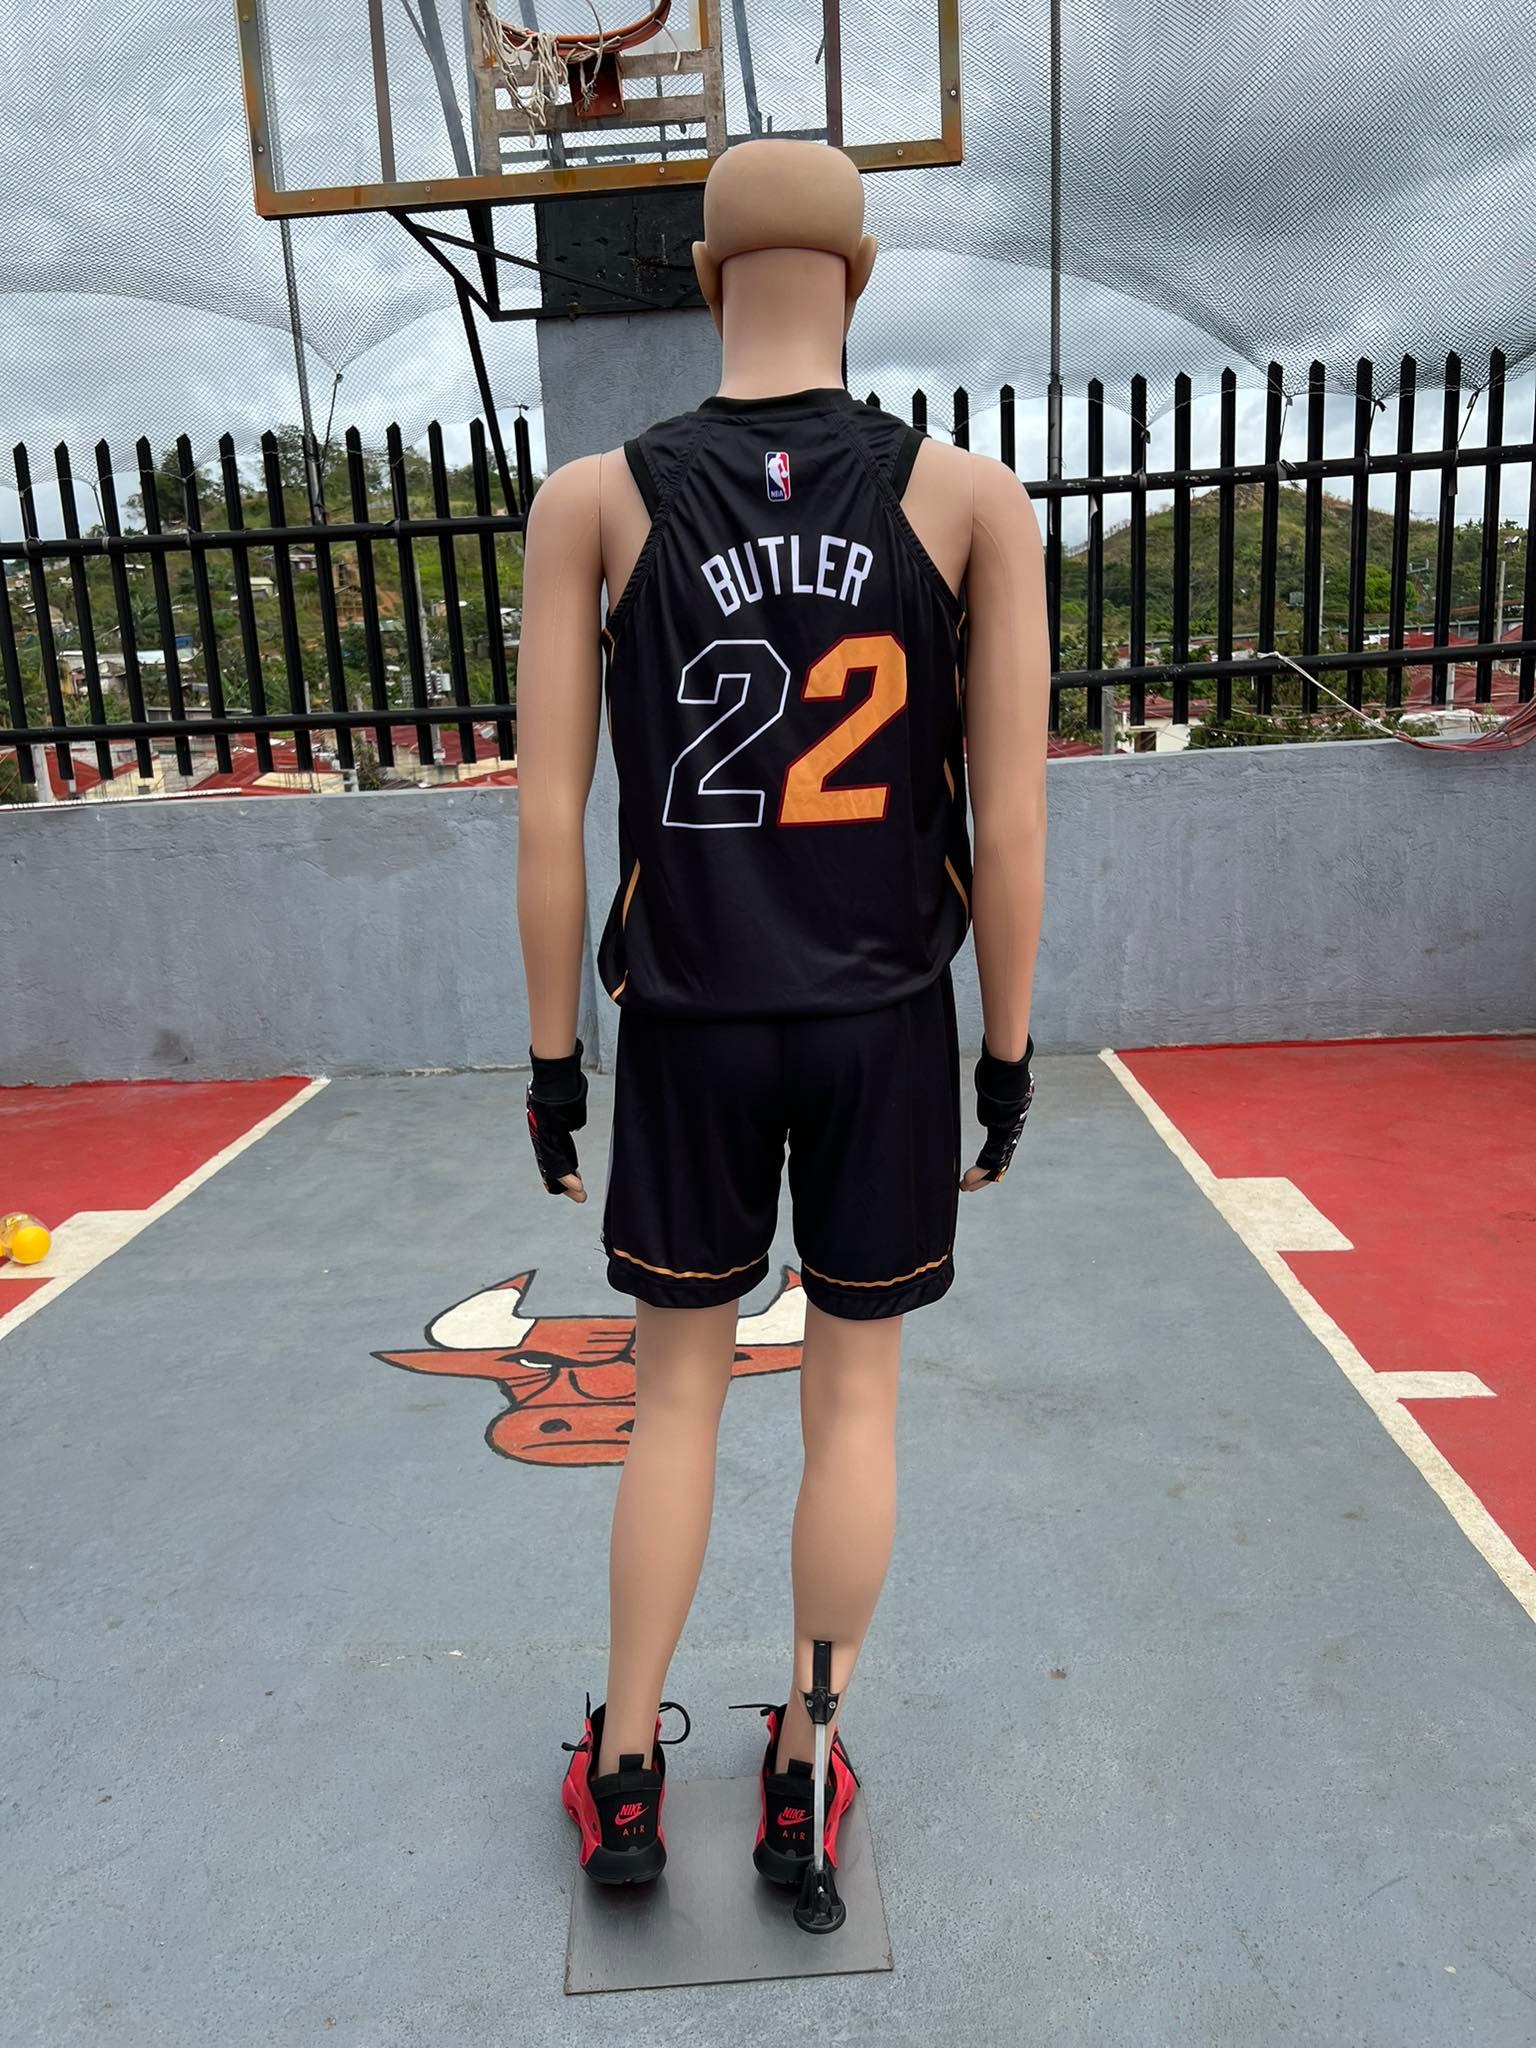 NEW EDITION MIAMI 04 JIMMY BUTLER JERSEY FREE CUSTOMIZE OF NAME&NUMBER ONLY  full sublimation with high quality fabrics basketball jersey/trend jersey/ jersey